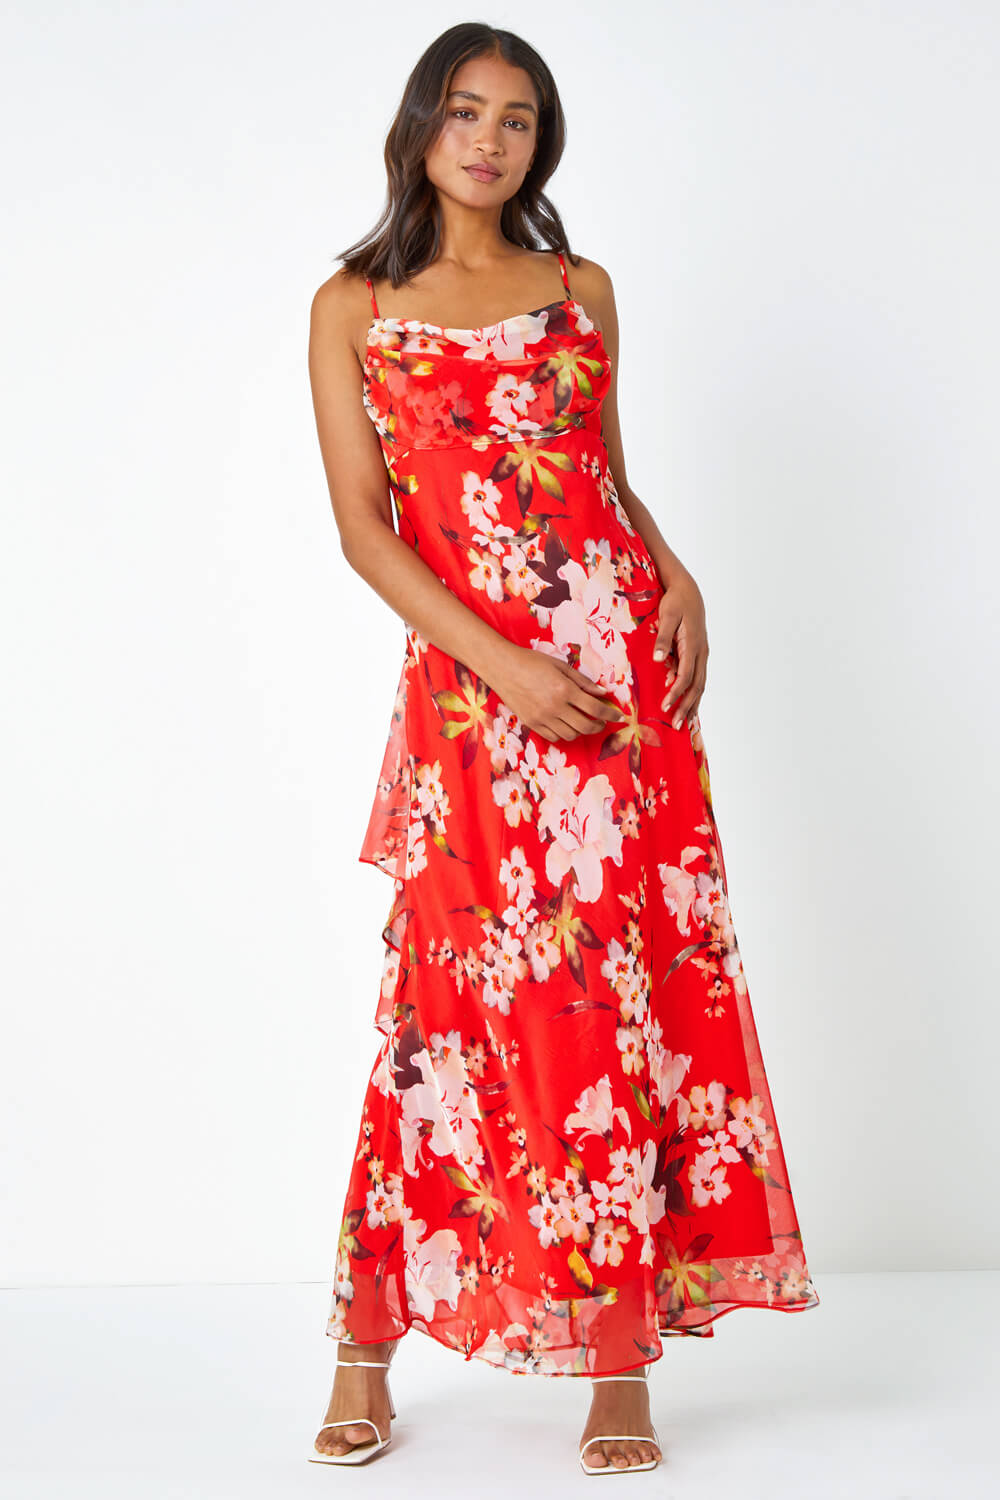 Red Floral Cowl Neck Chiffon Dress, Image 2 of 6